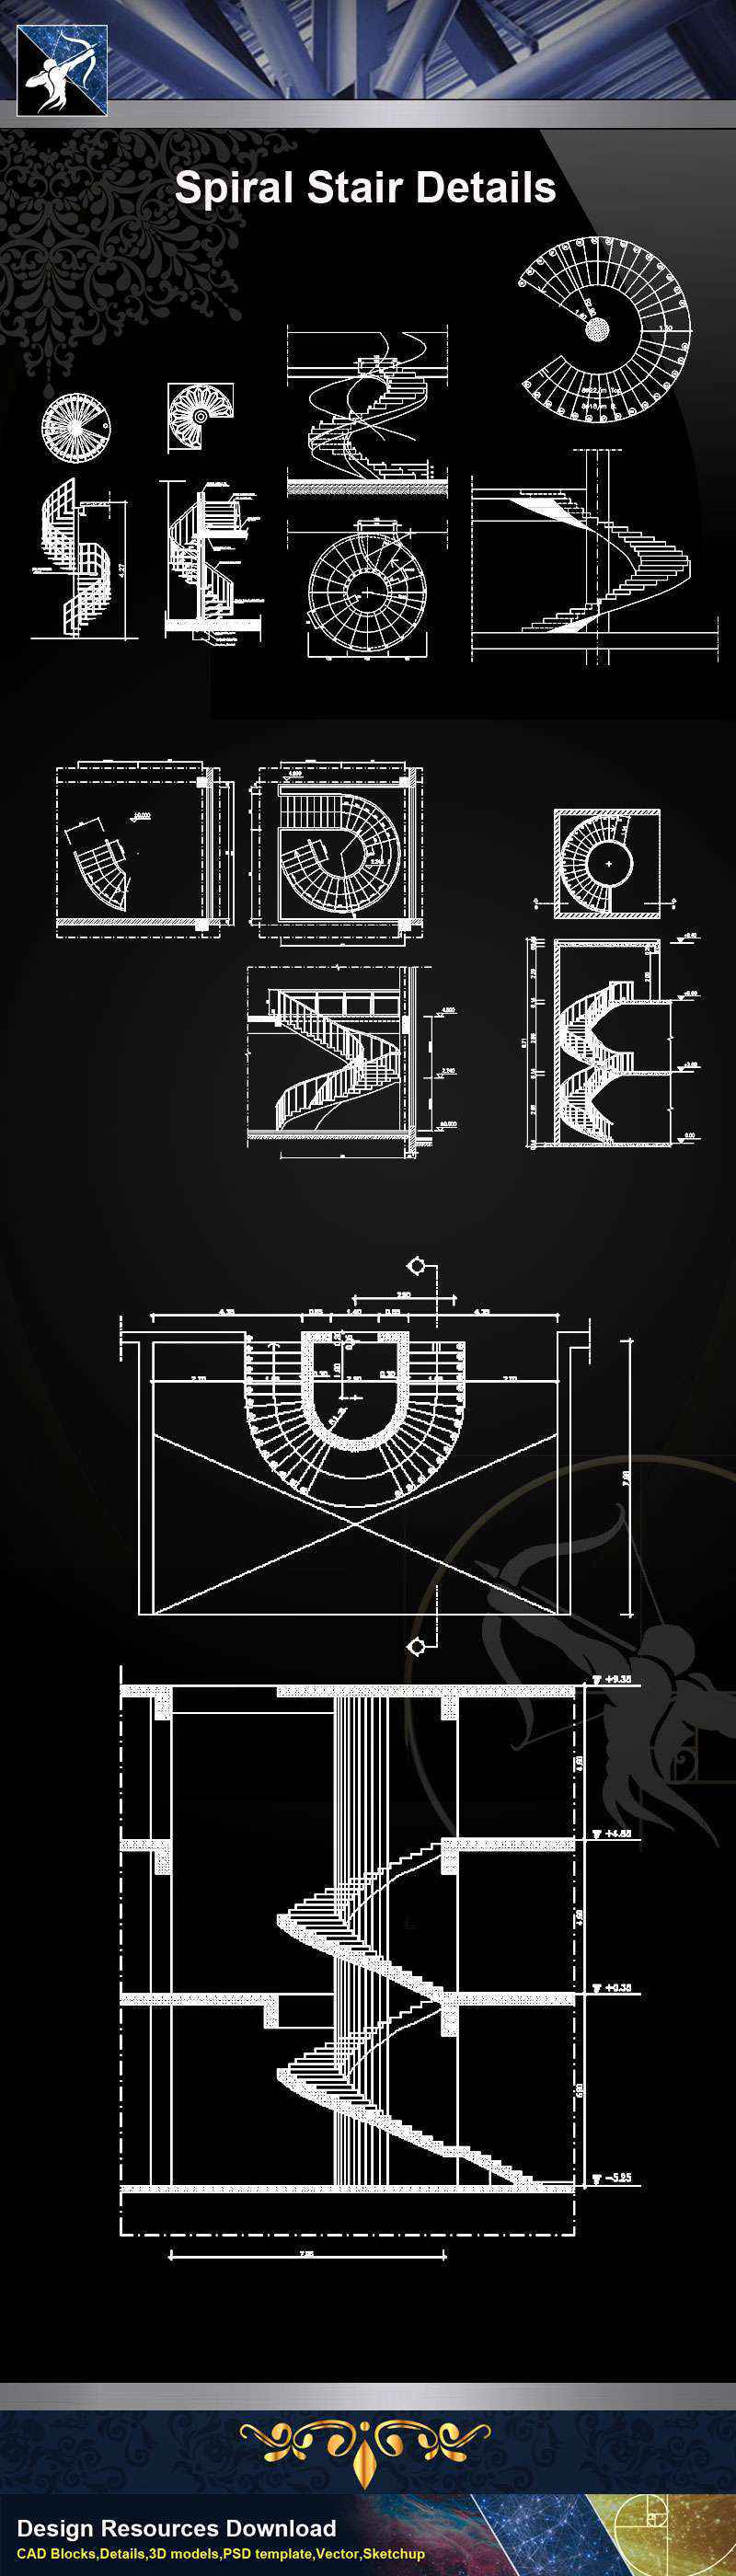 【Architecture CAD Details Collections】Spiral Stair CAD Details